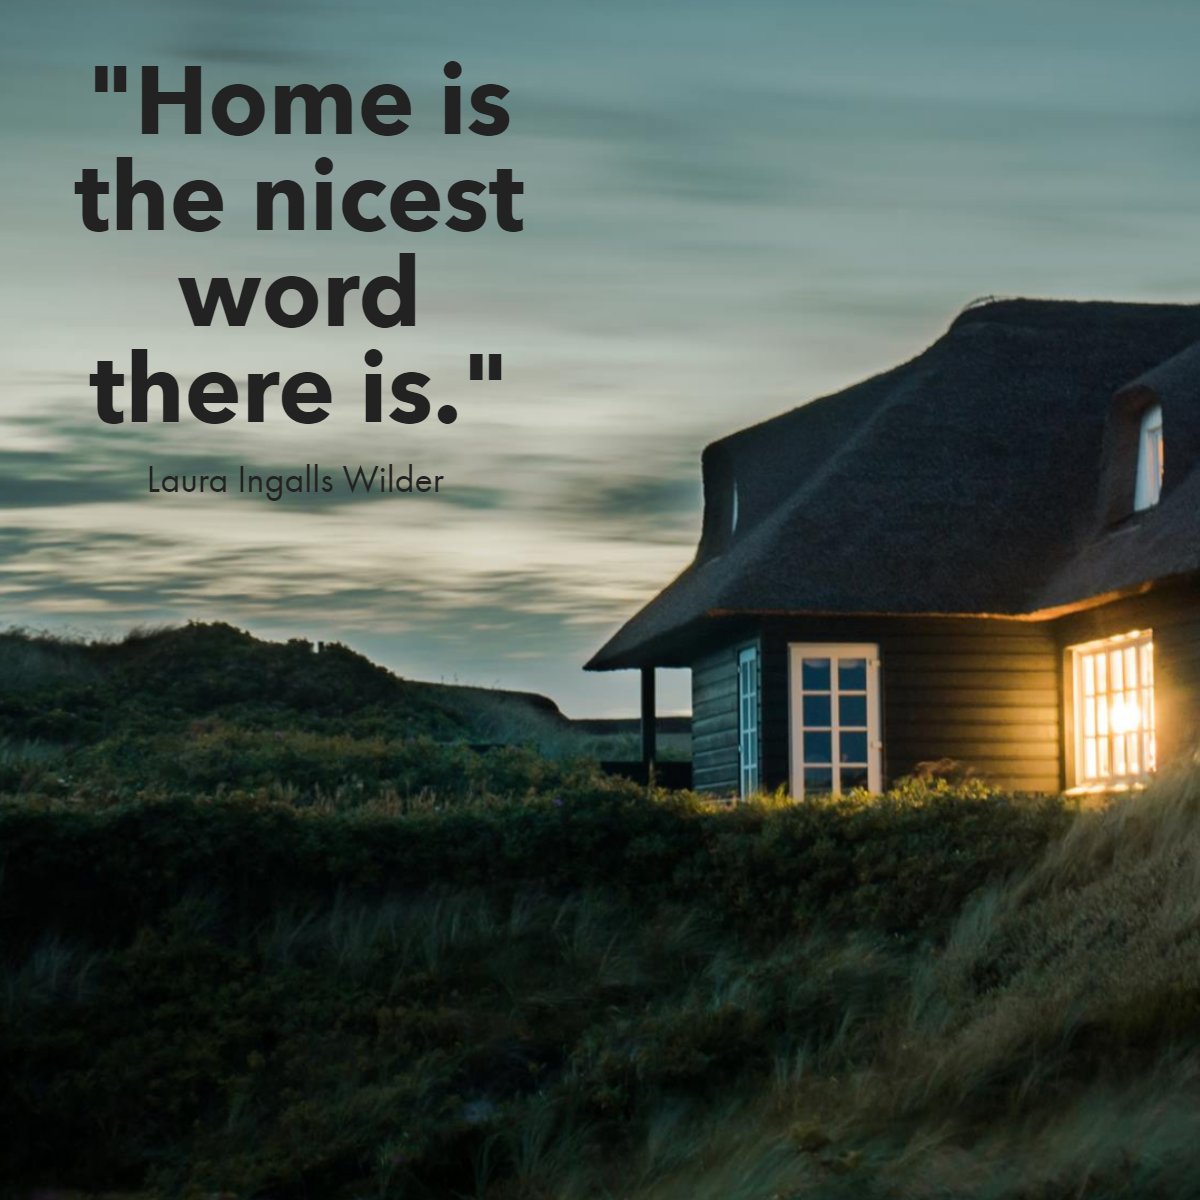 'Home is the nicest word there is.' 
― Laura Ingalls Wilder 📖

#home     #quote     #word     #family     #requotes     #quoteoftheday     #lauraingallswilder